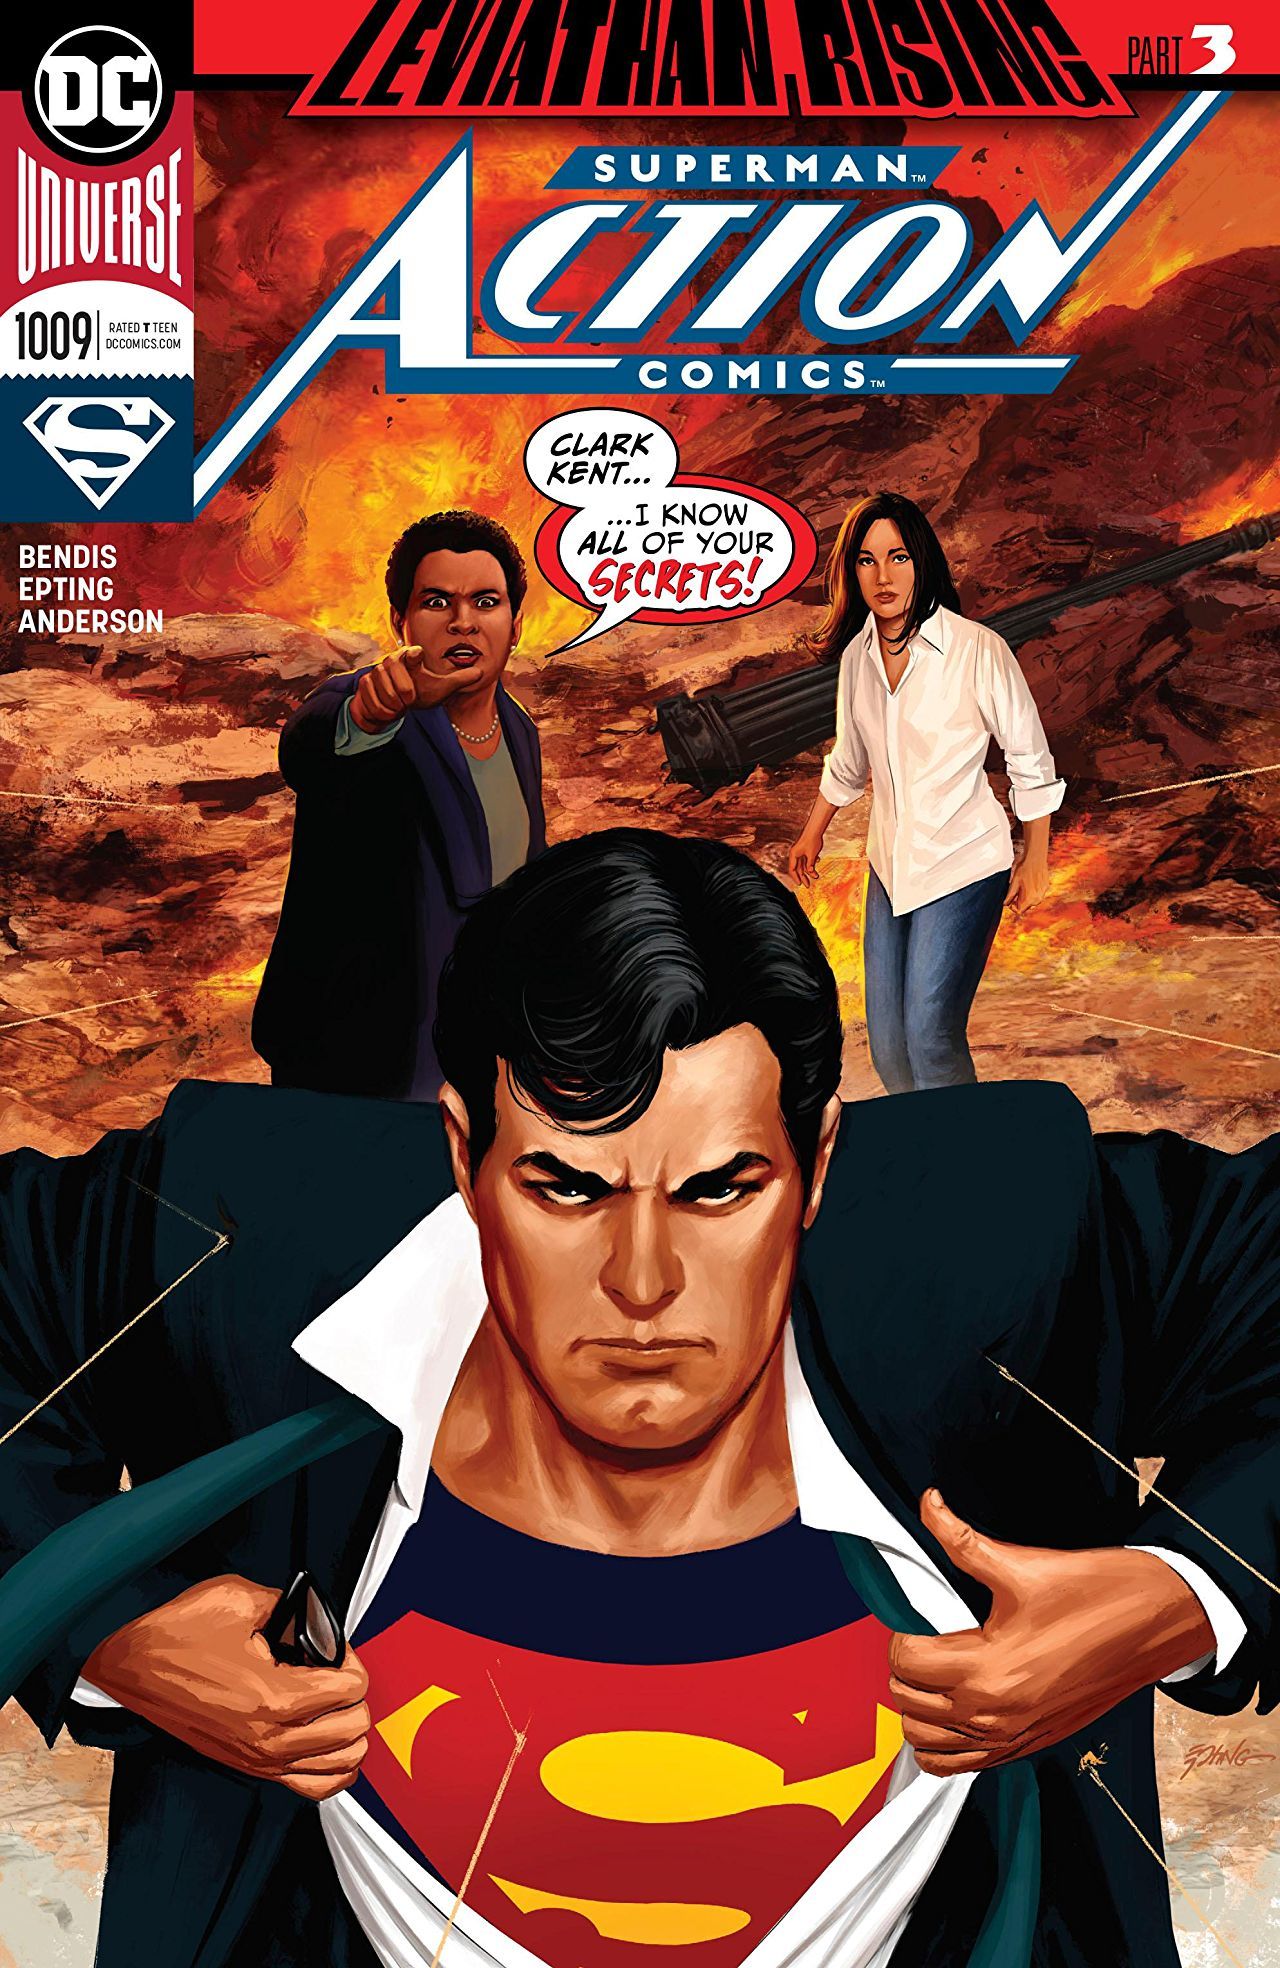 Action Comics #1009 Cover